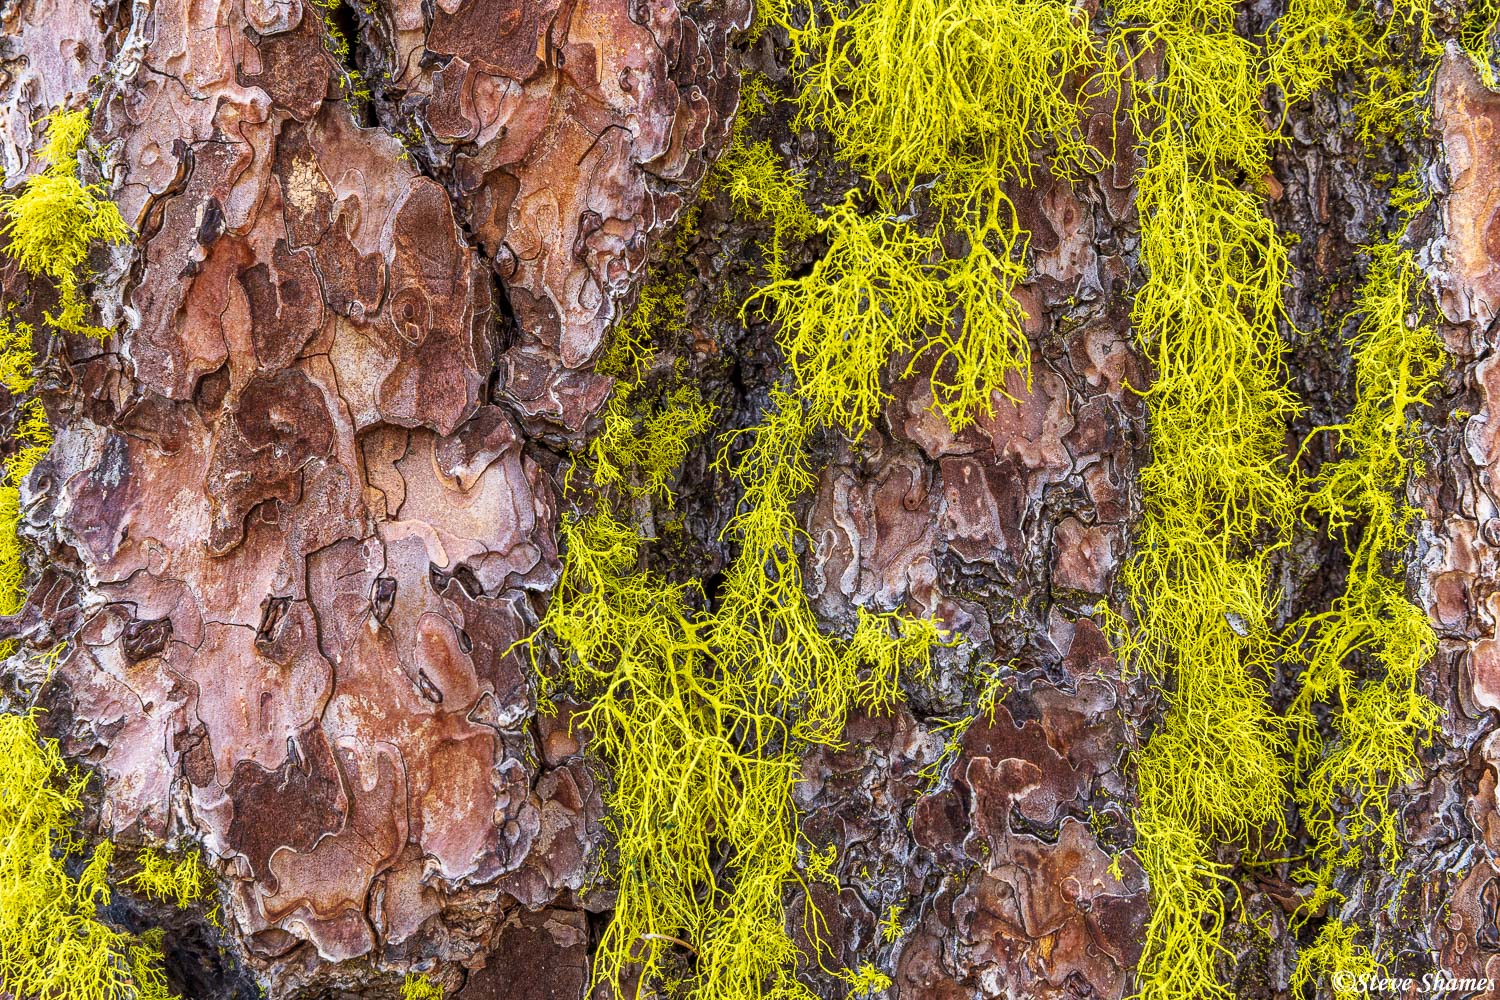 Lichen on a pine tree. The bark pieces kind of reminded me of jigsaw puzzle pieces.